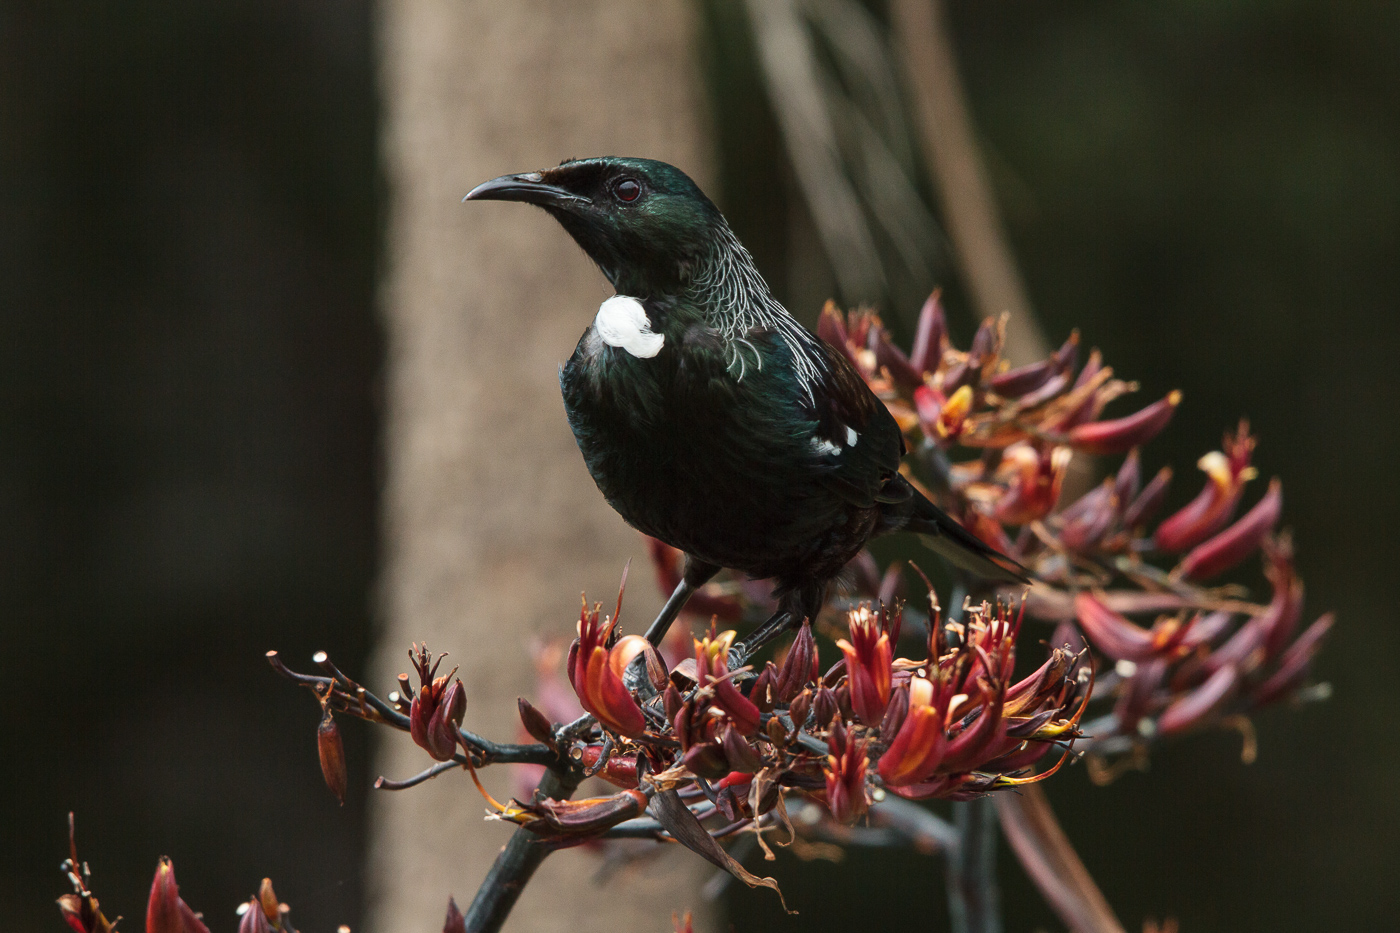 Tui visiting the garden flax